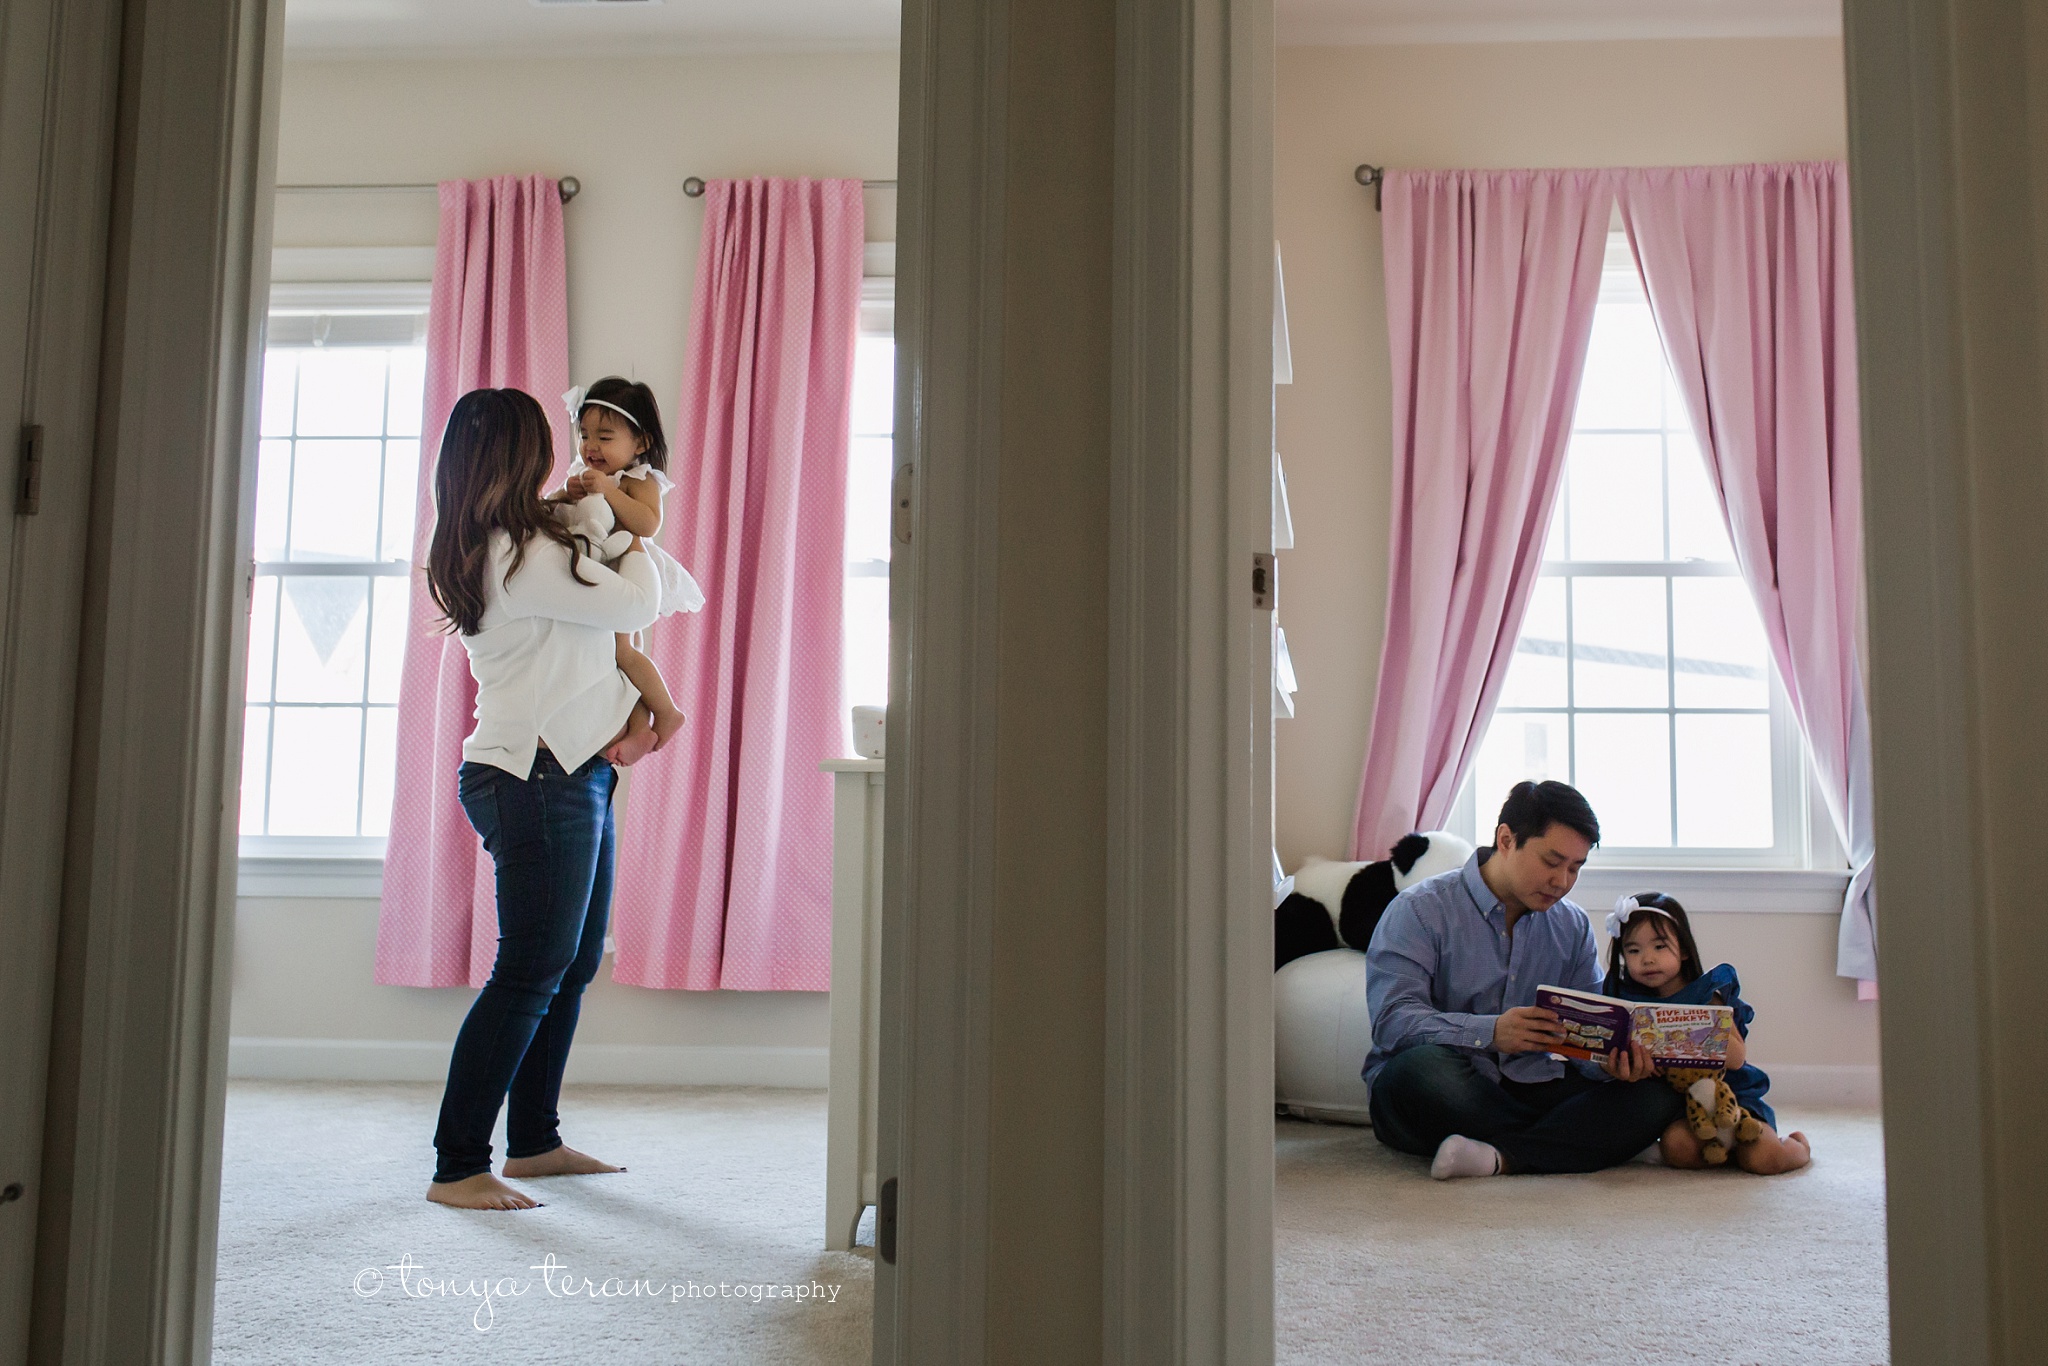 In-home Mini Family Photo Session | Tonya Teran Photography, Potomac, MD Best Newborn, Baby, and Family Photographer